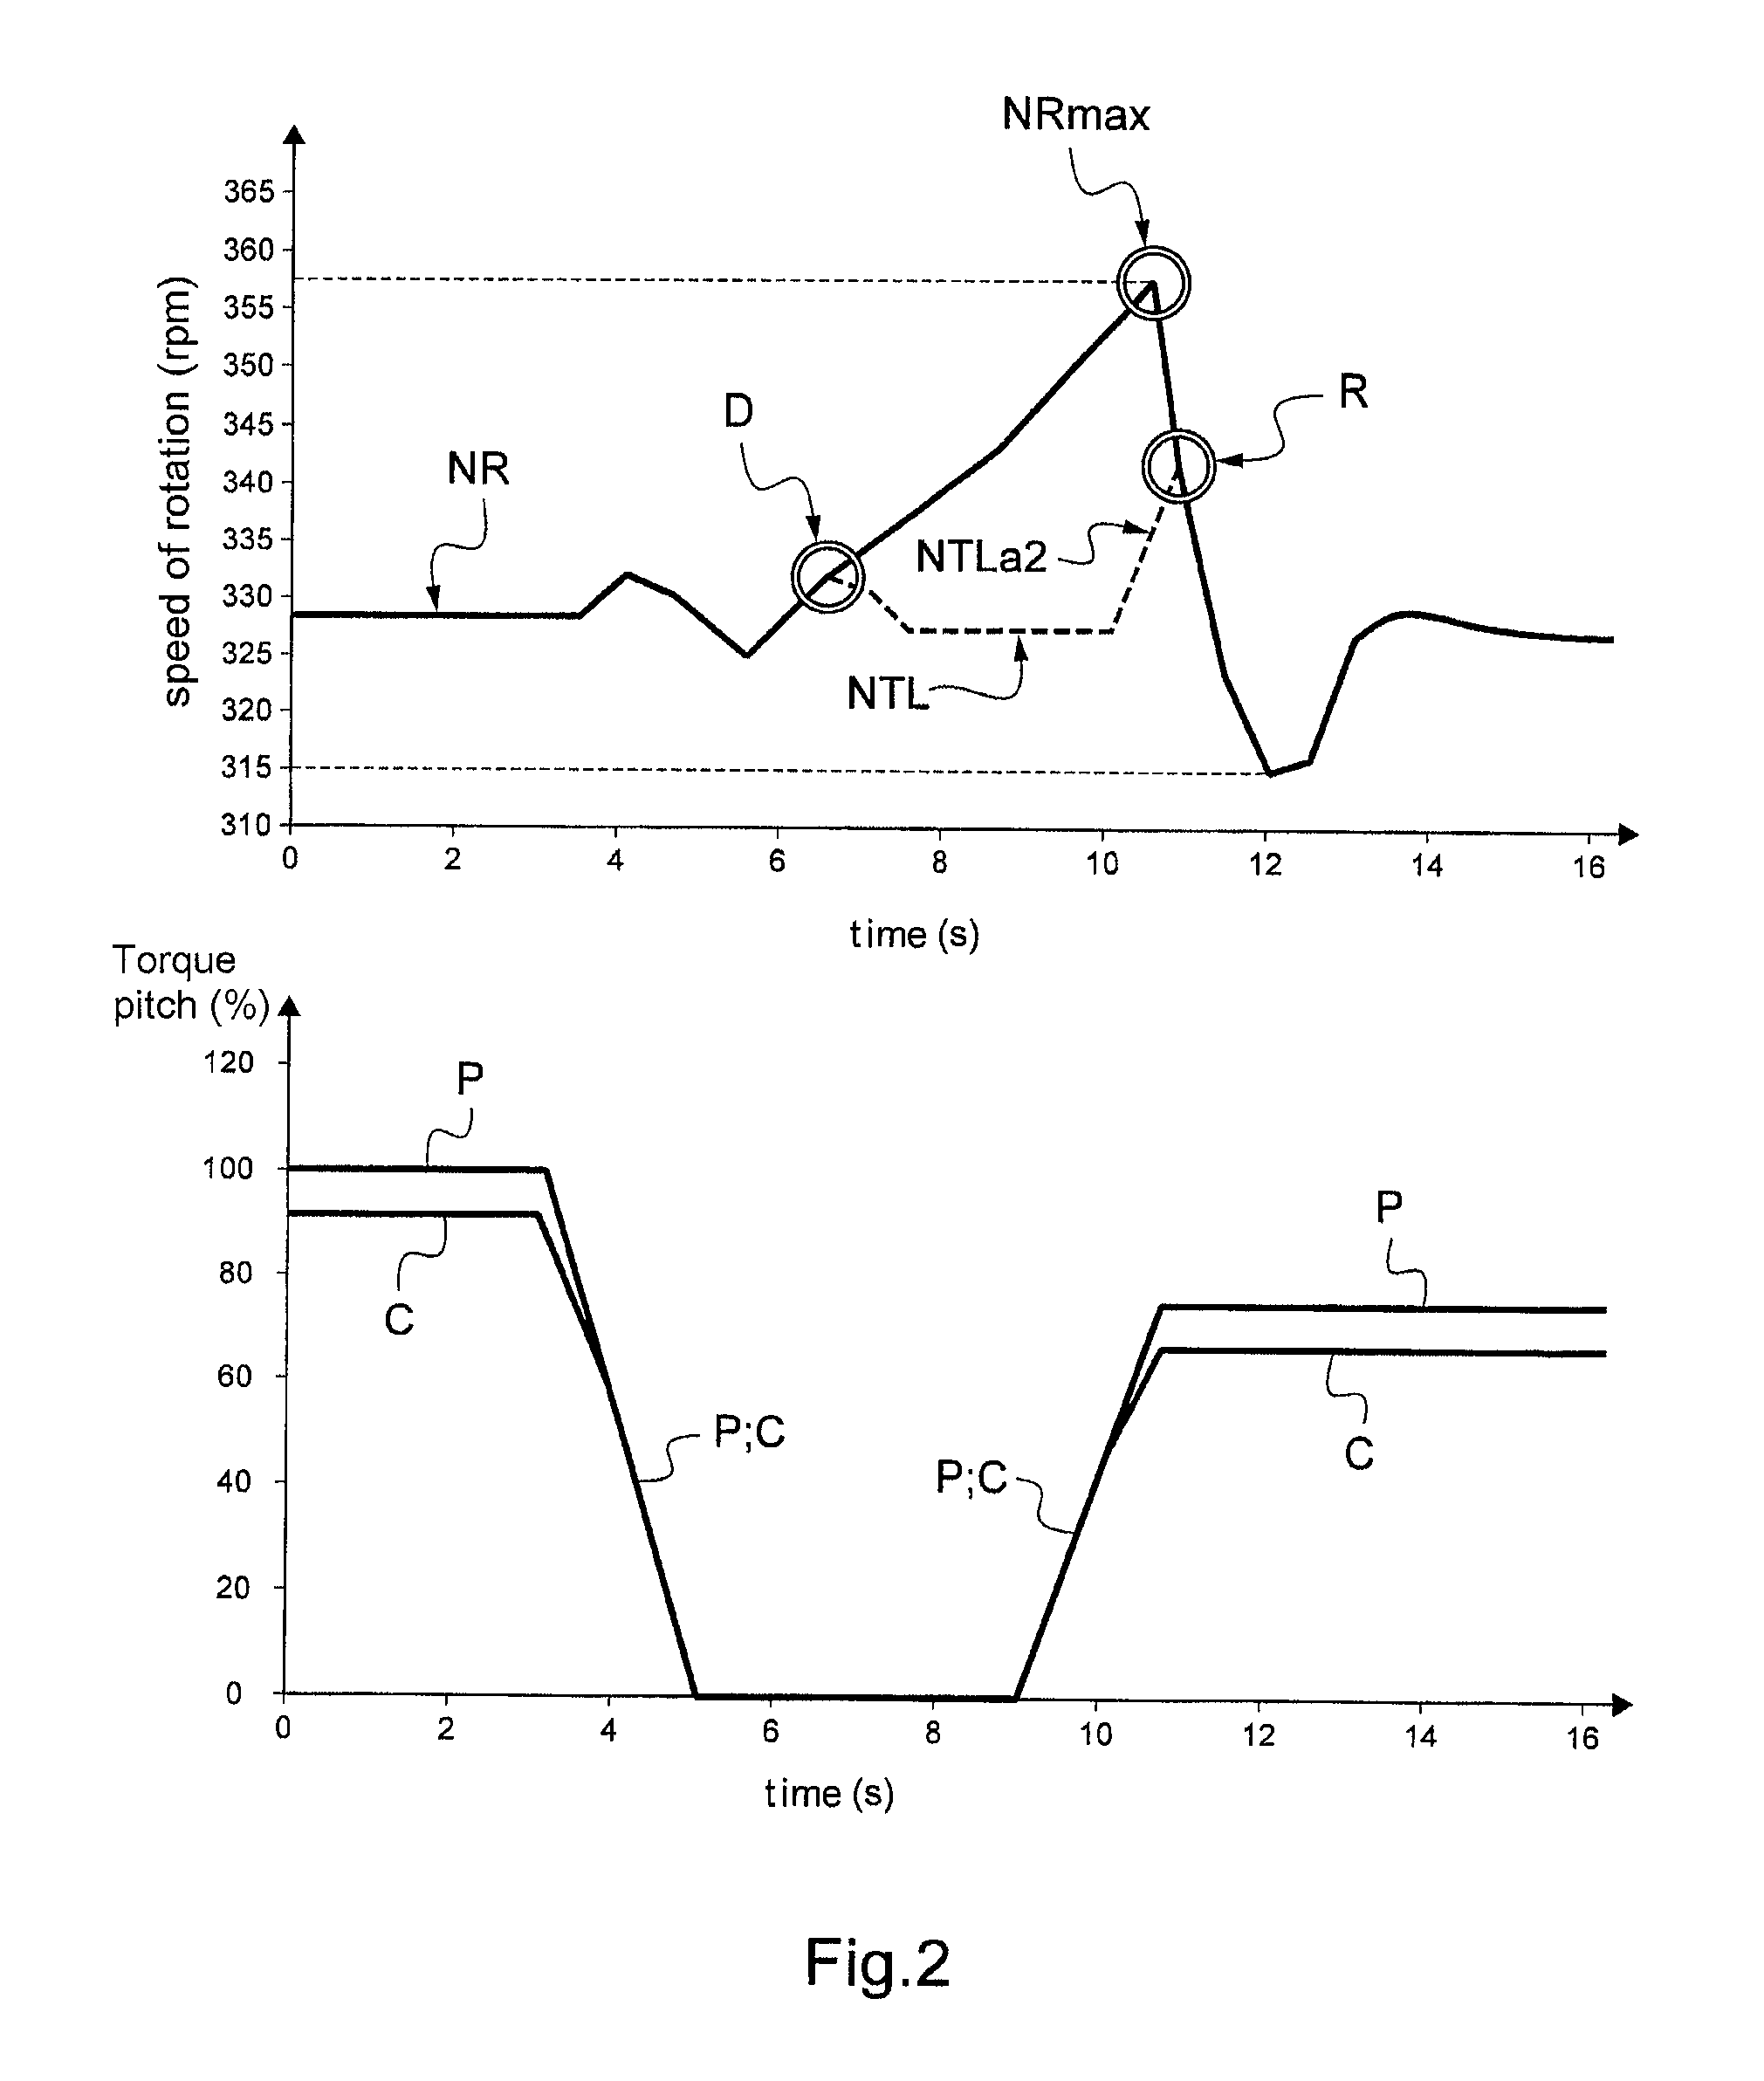 Passing from a non-synchronized state between an engine and a rotor to a synchronized state